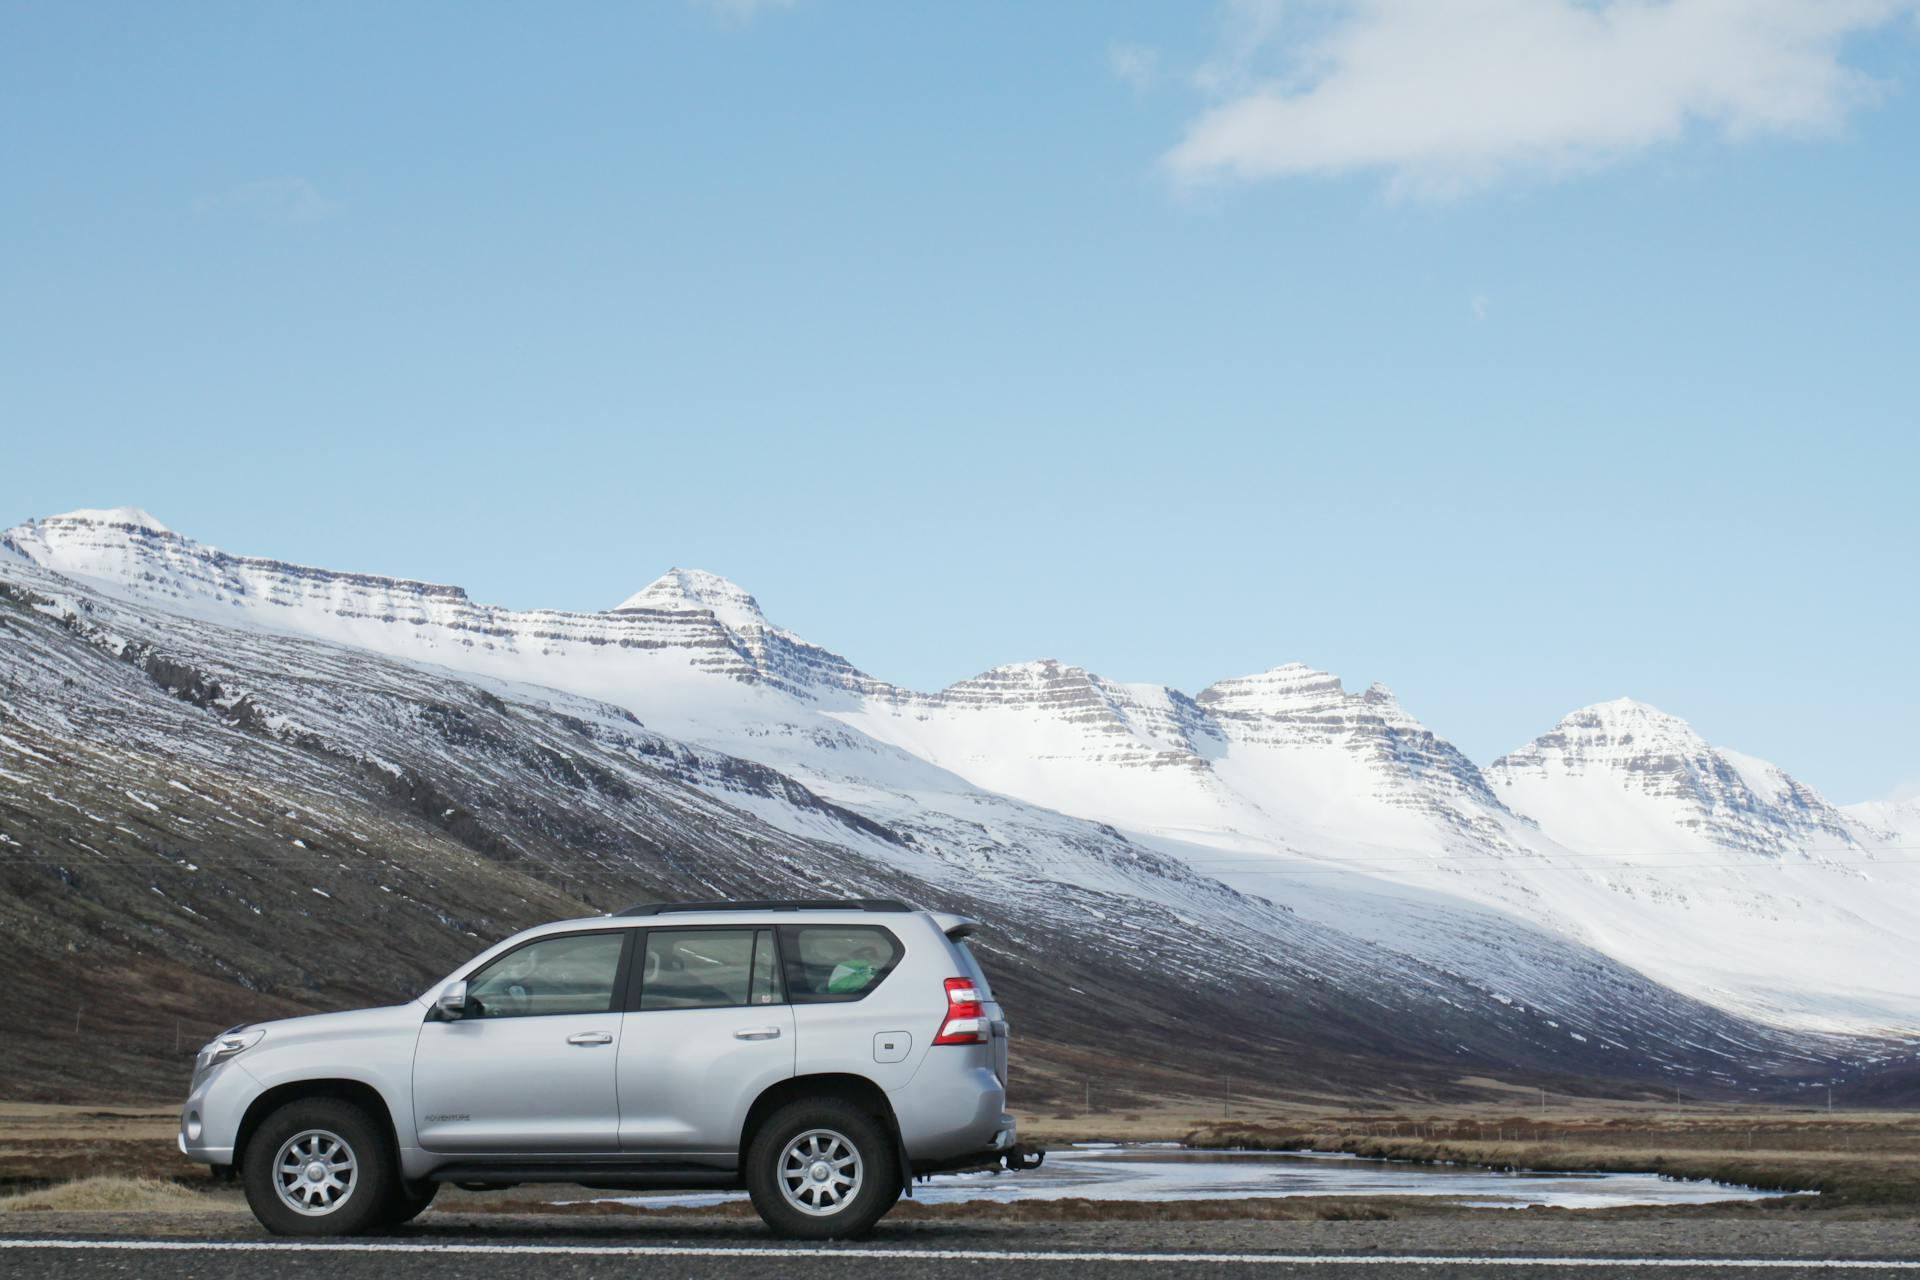 Gray Sports Utility Vehicle on Road Near Snow Covered Mountain